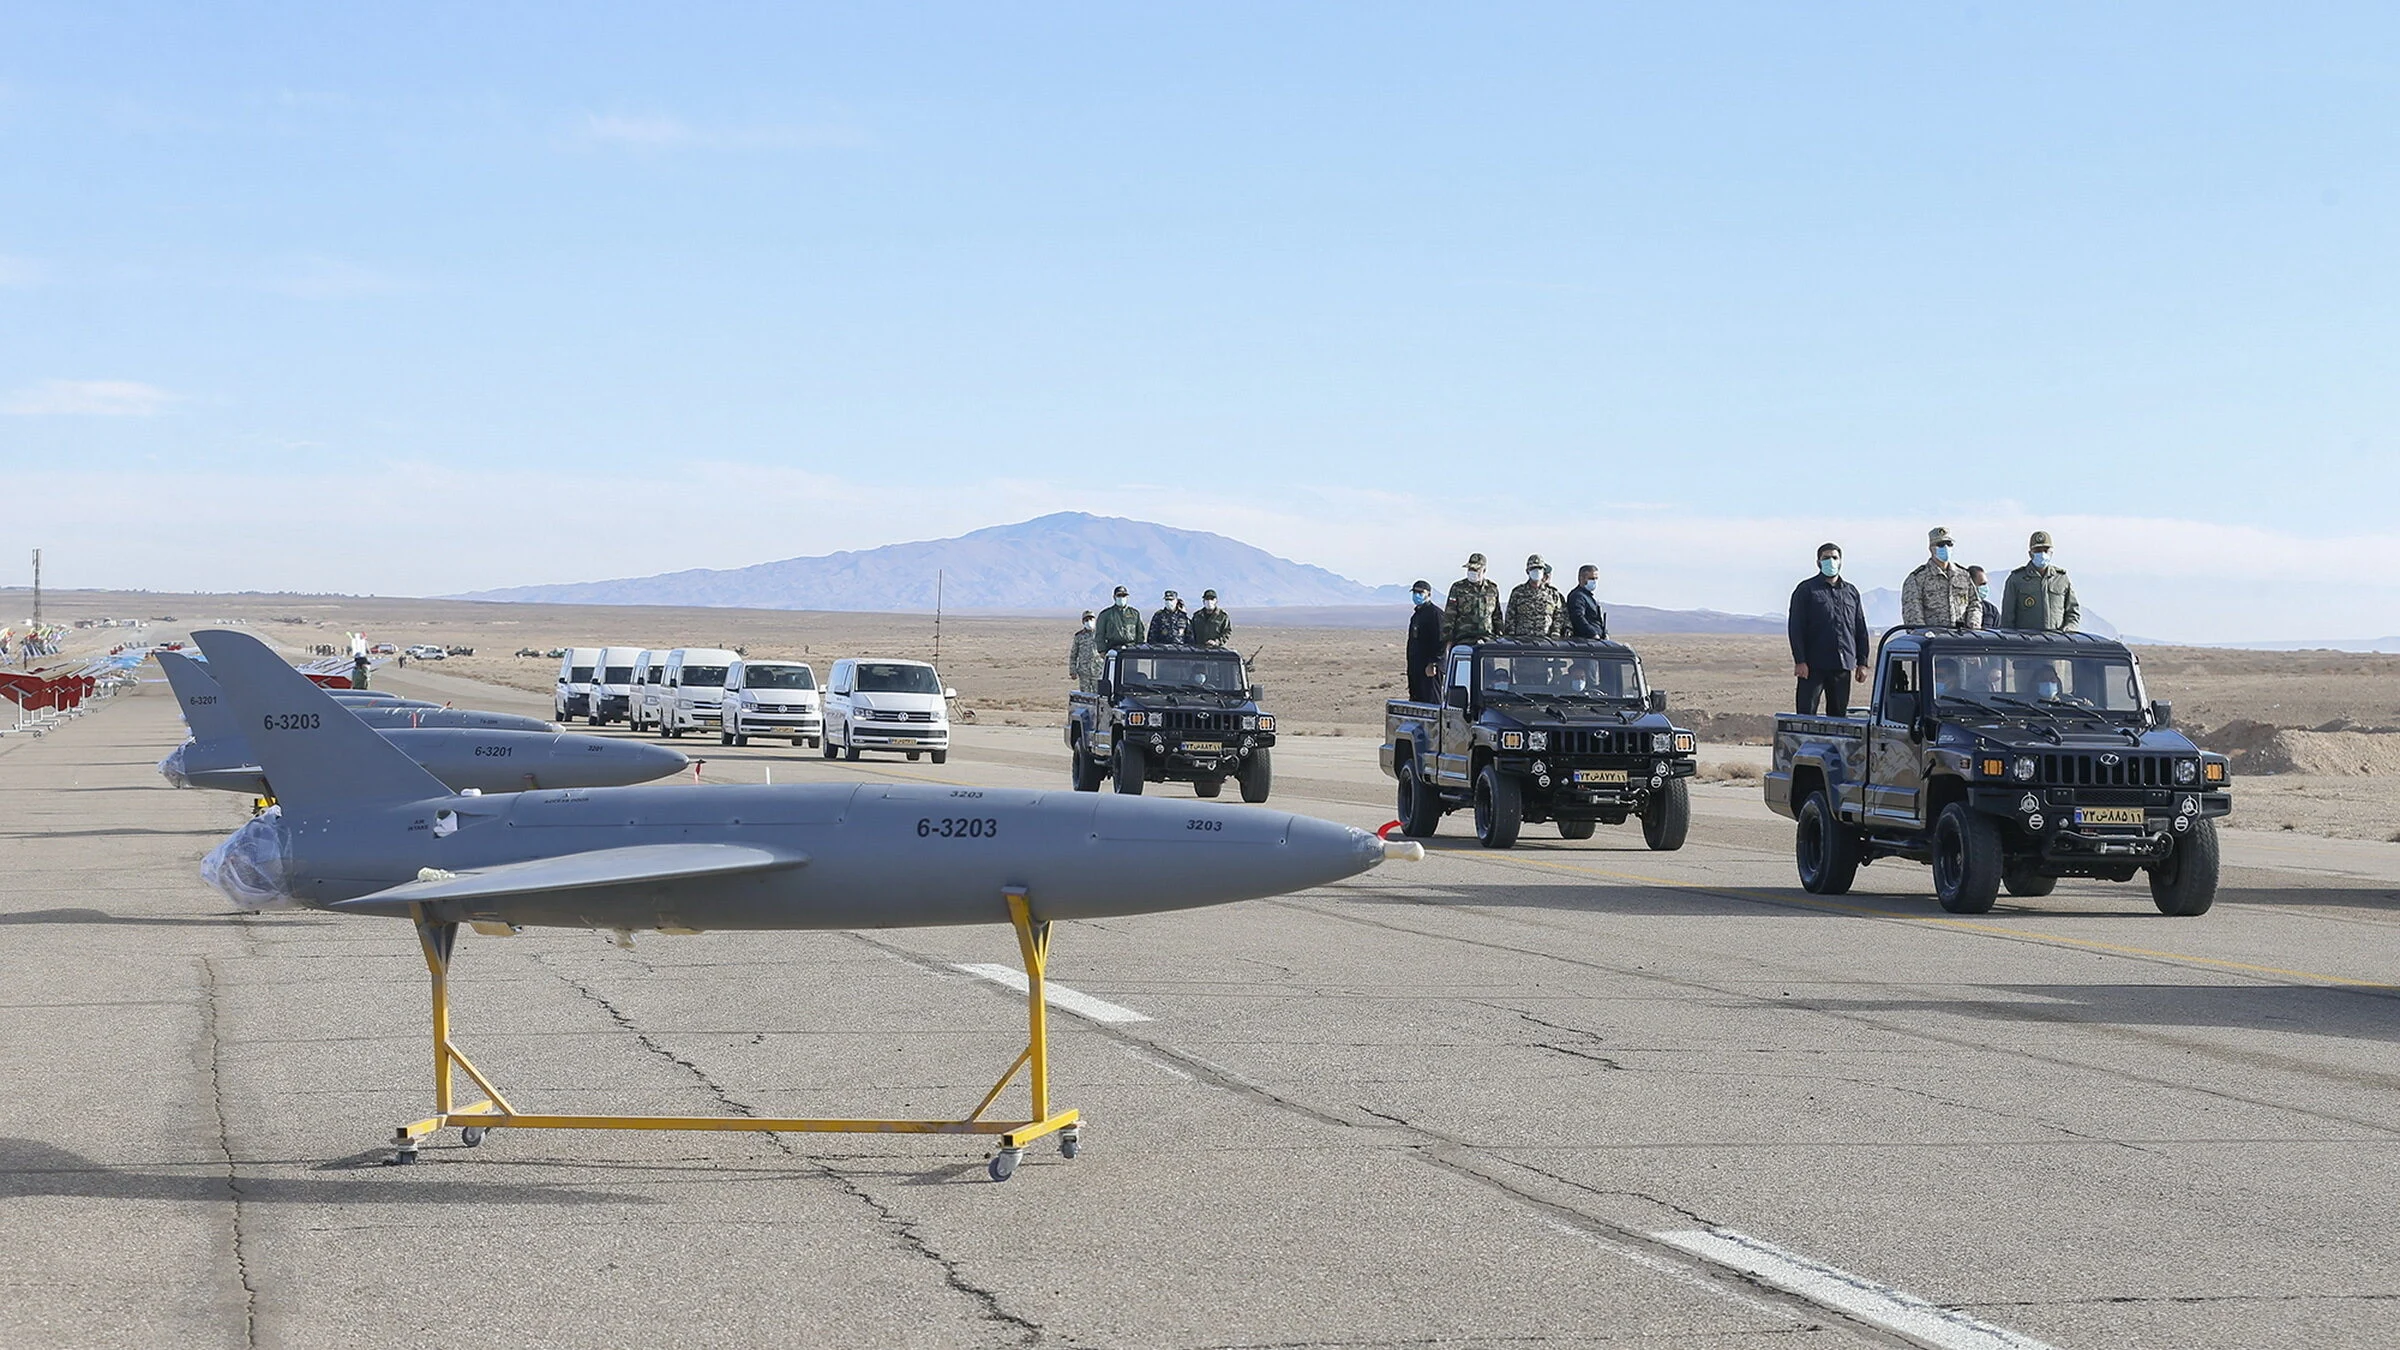 Ukraine's military claims Iran plans to send sophisticated Arash-2 attack drones to Russia